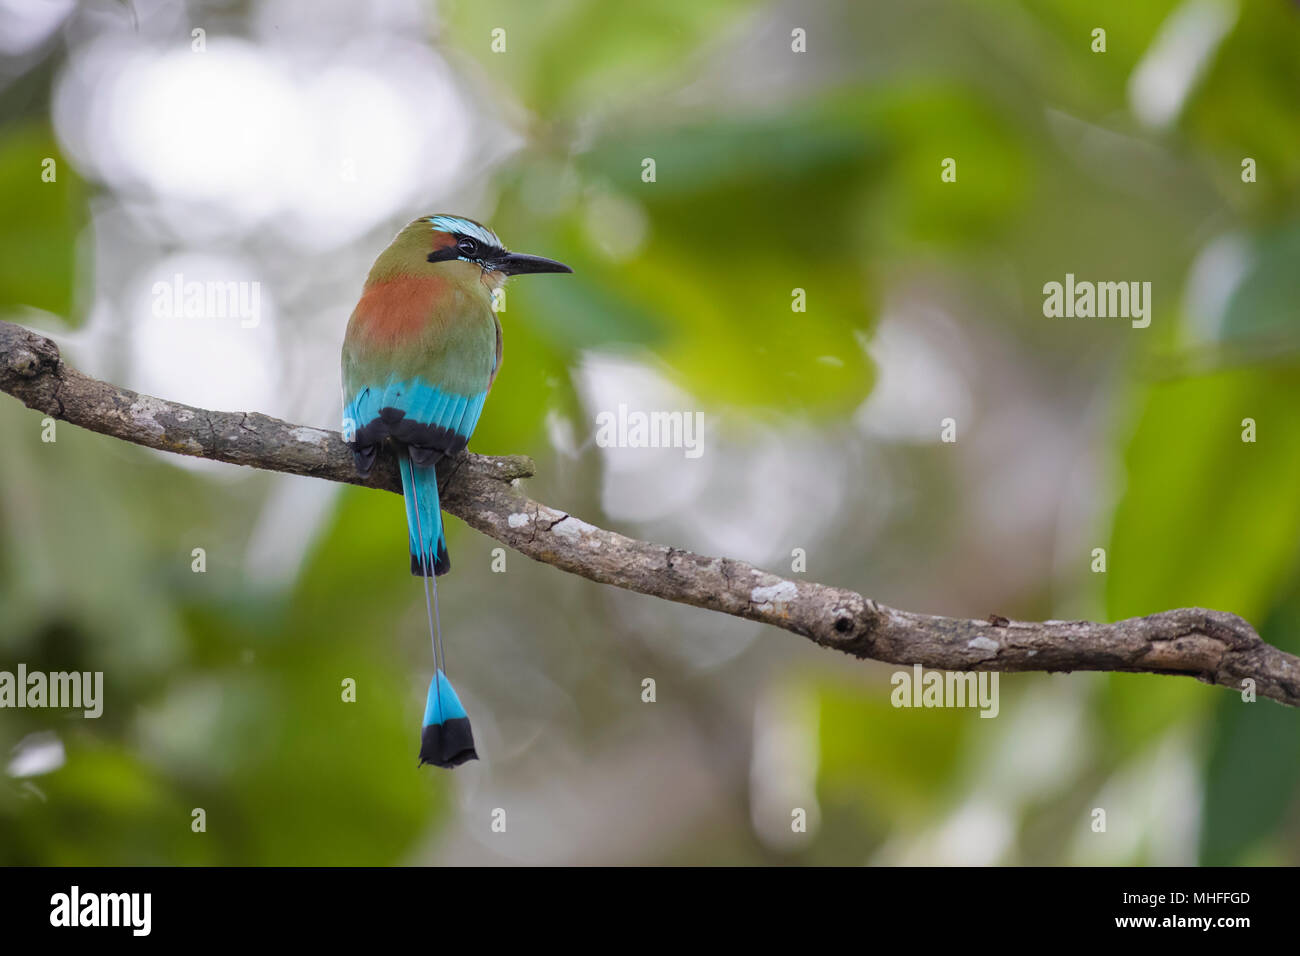 Turquoise-browed Motmot - Eumomota superciliosa, beautiful colorful motmot from Central America forests, Costa Rica. Stock Photo